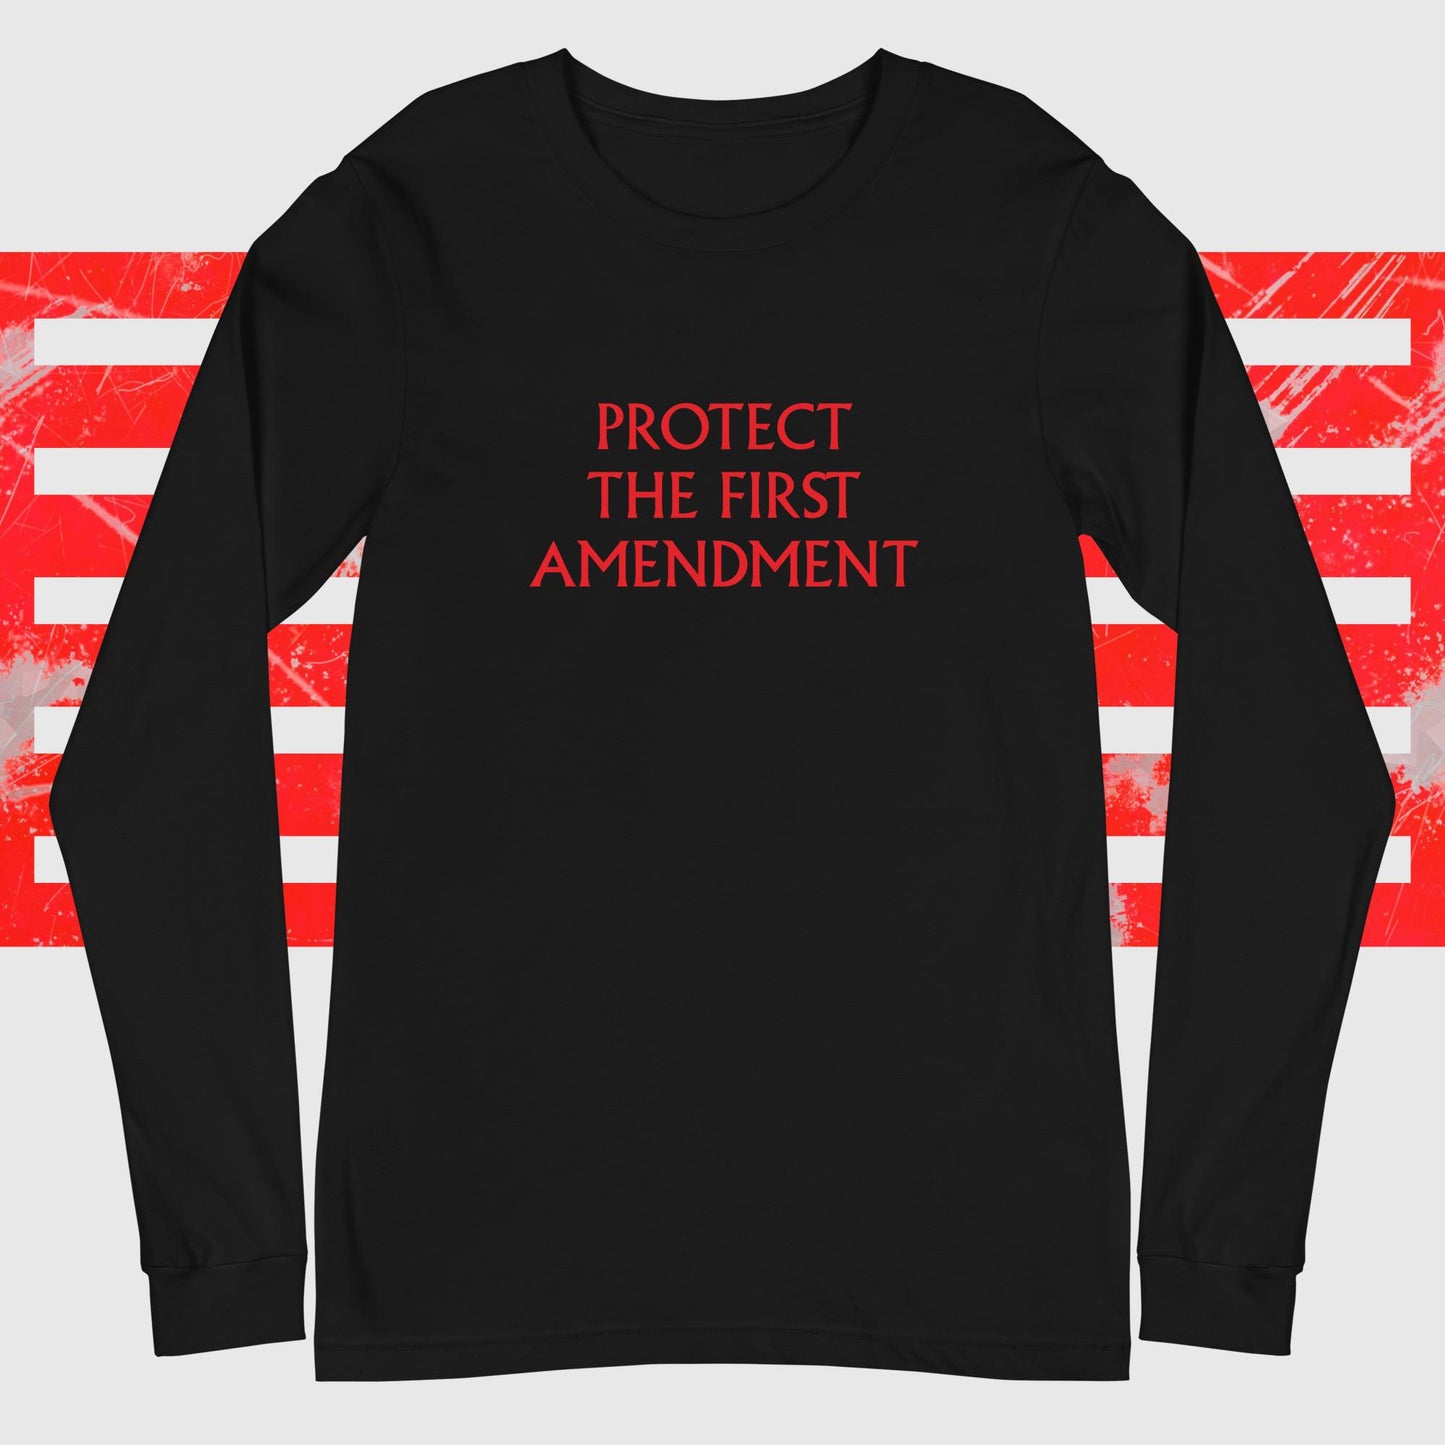 Protect the First Amendment Unisex Long-Sleeve Tee